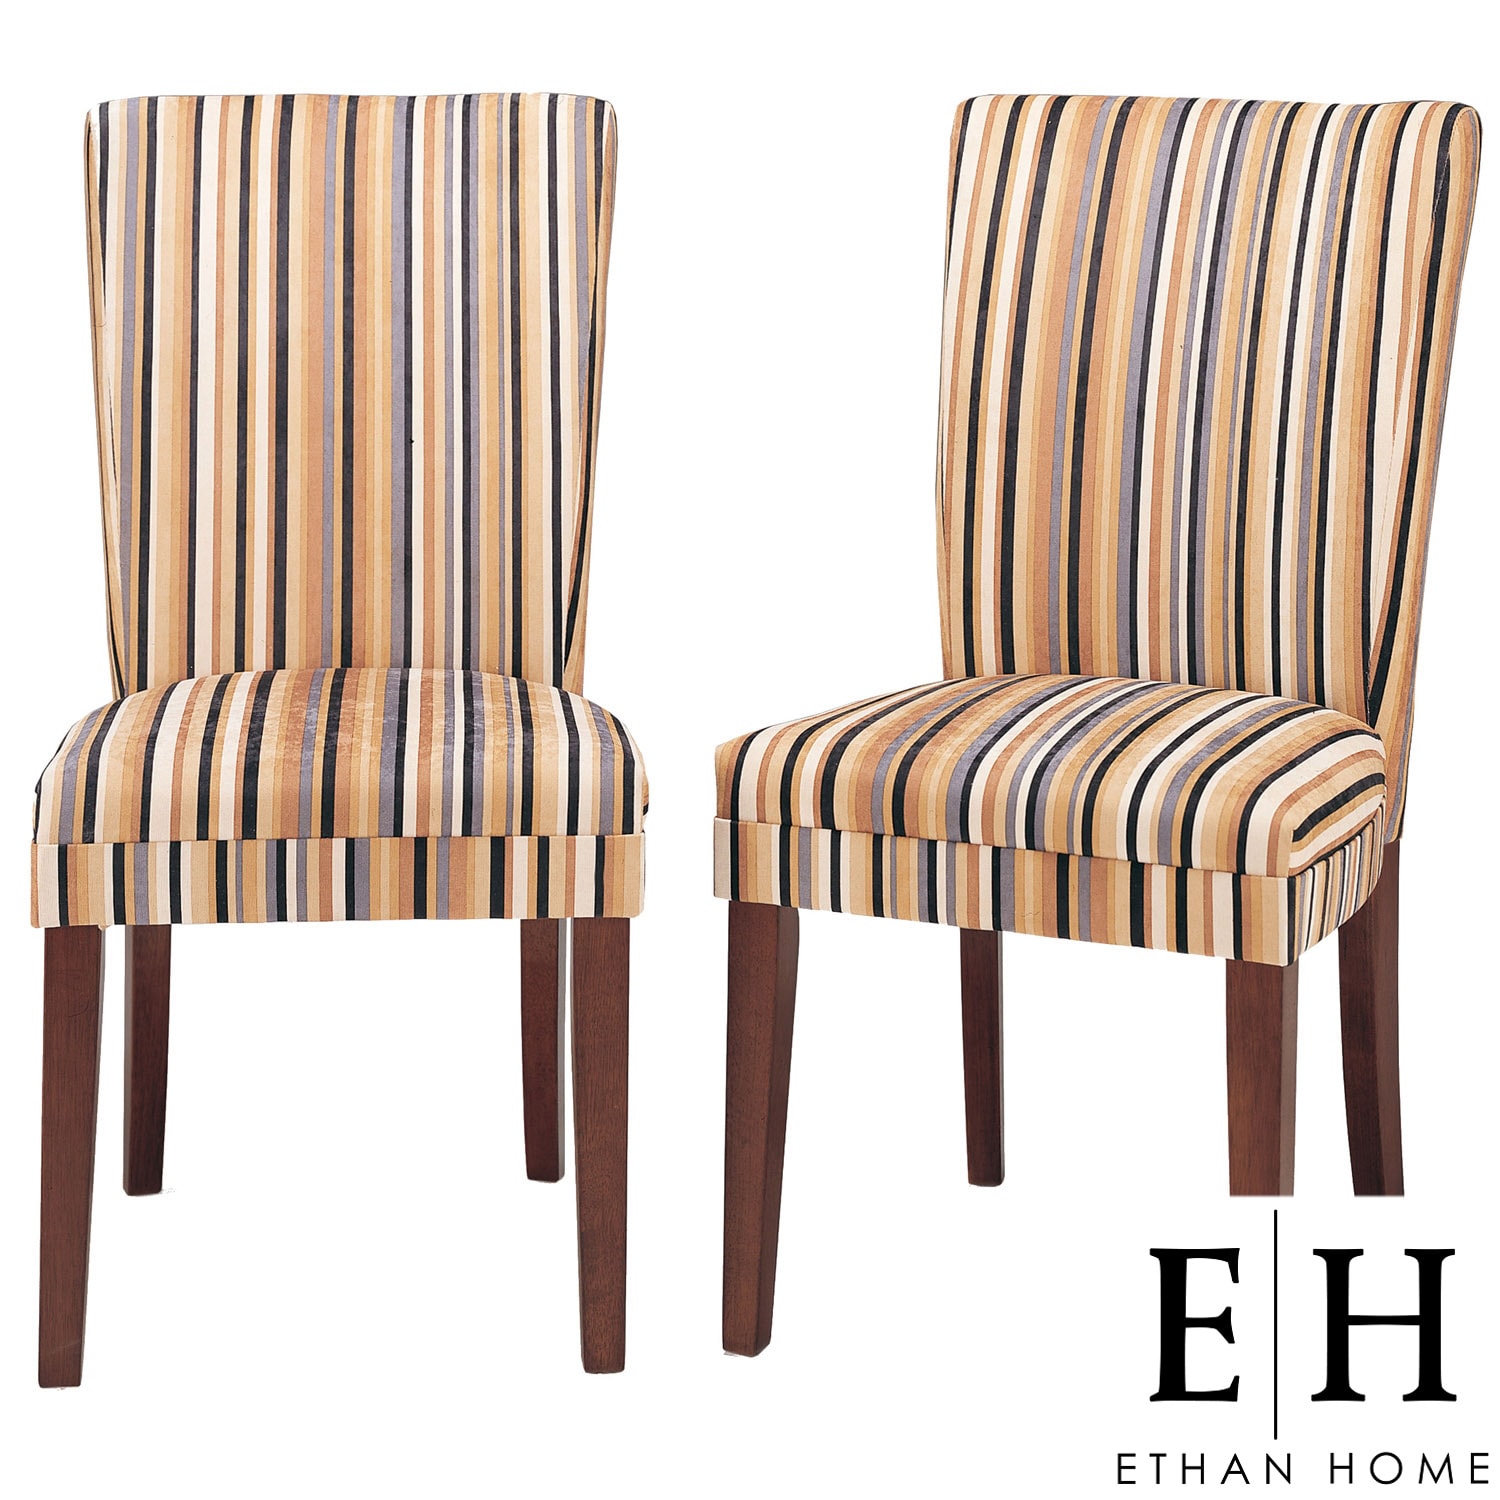 upholstered dining chair set of 2 compare $ 259 99 today $ 199 99